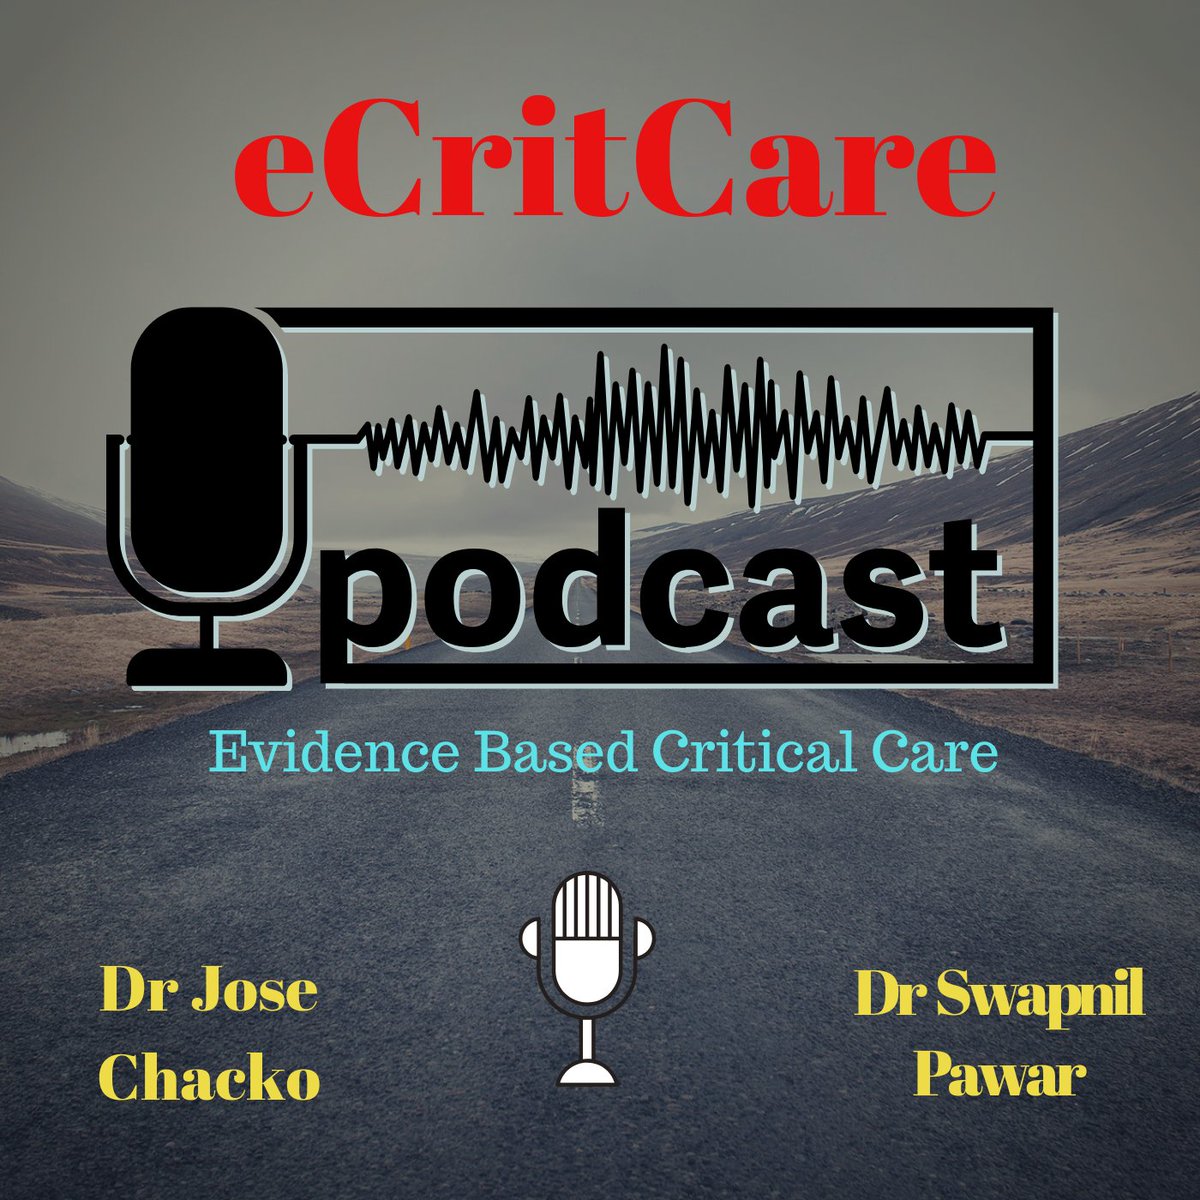 Join us in our latest episode of the eCritCare podcast, where we discuss the recently published landmark RCT 'ELAN Trial'.  Let us know your take on this trial ..#foamed #foamcc #RCT #evidencebasedmedicine critcareedu.com.au/elan-trial-ear…